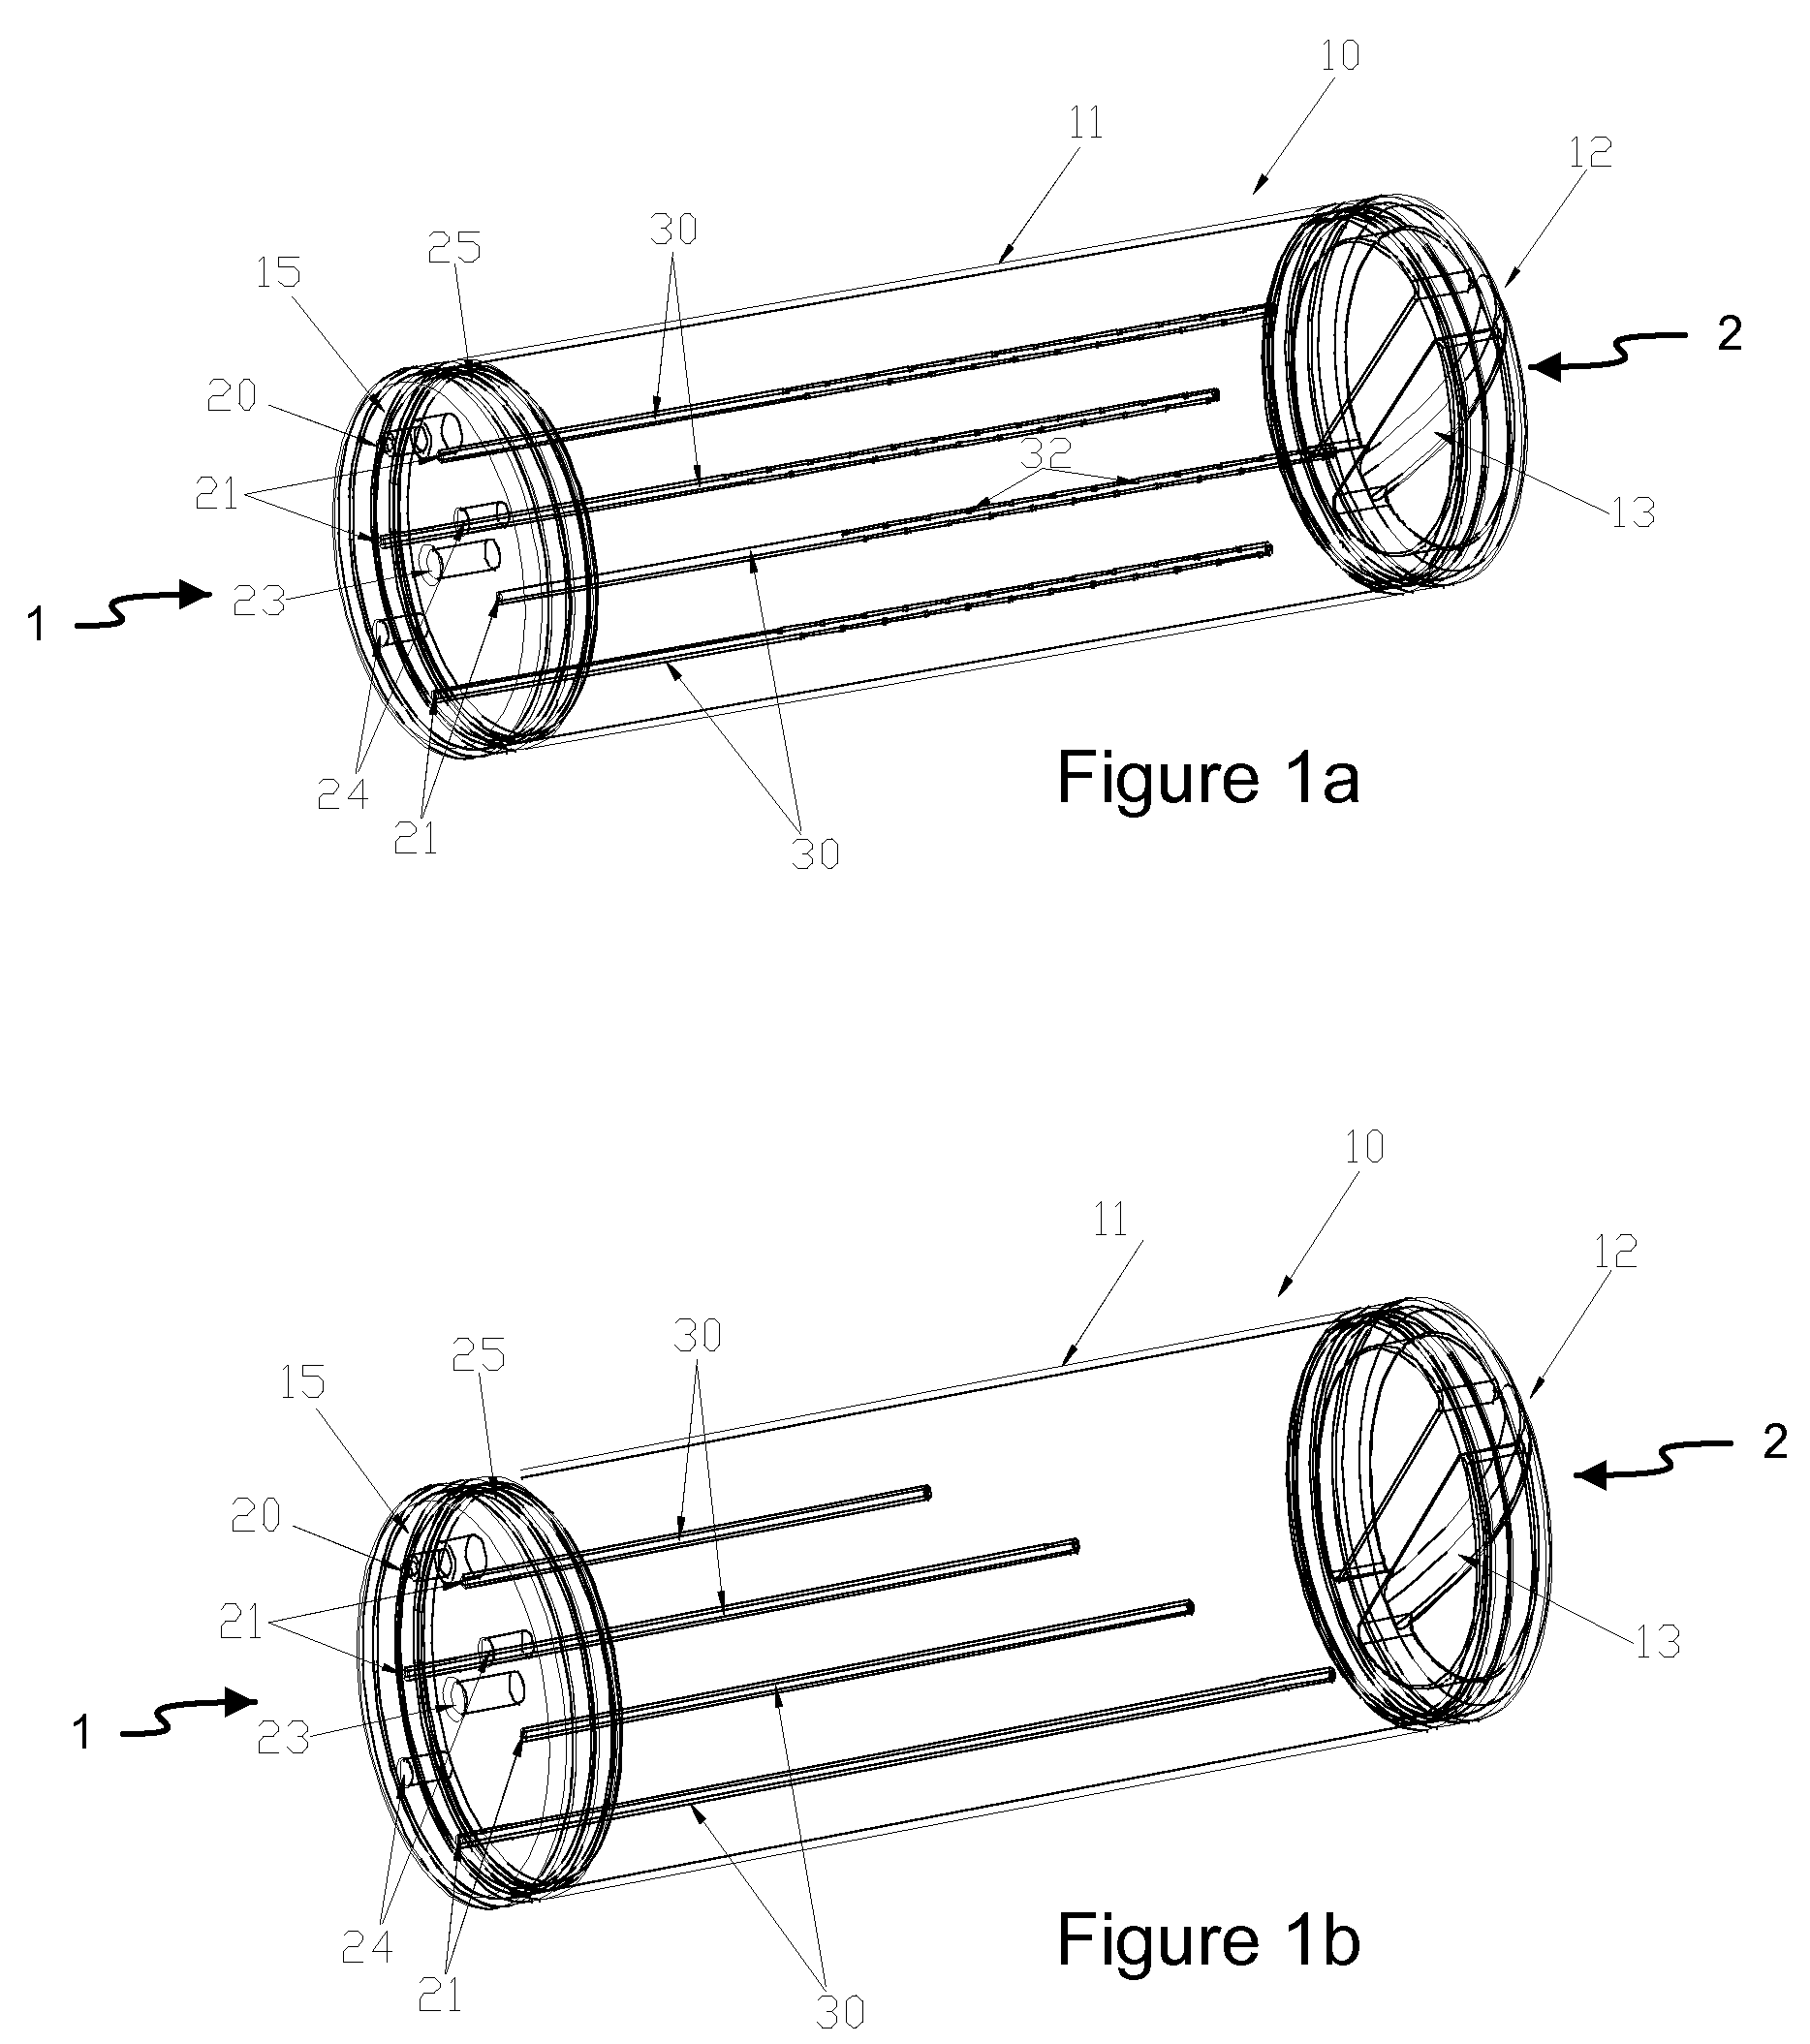 Apparatus and system for promoting a substantially complete reaction of an anhydrous hydride reactant